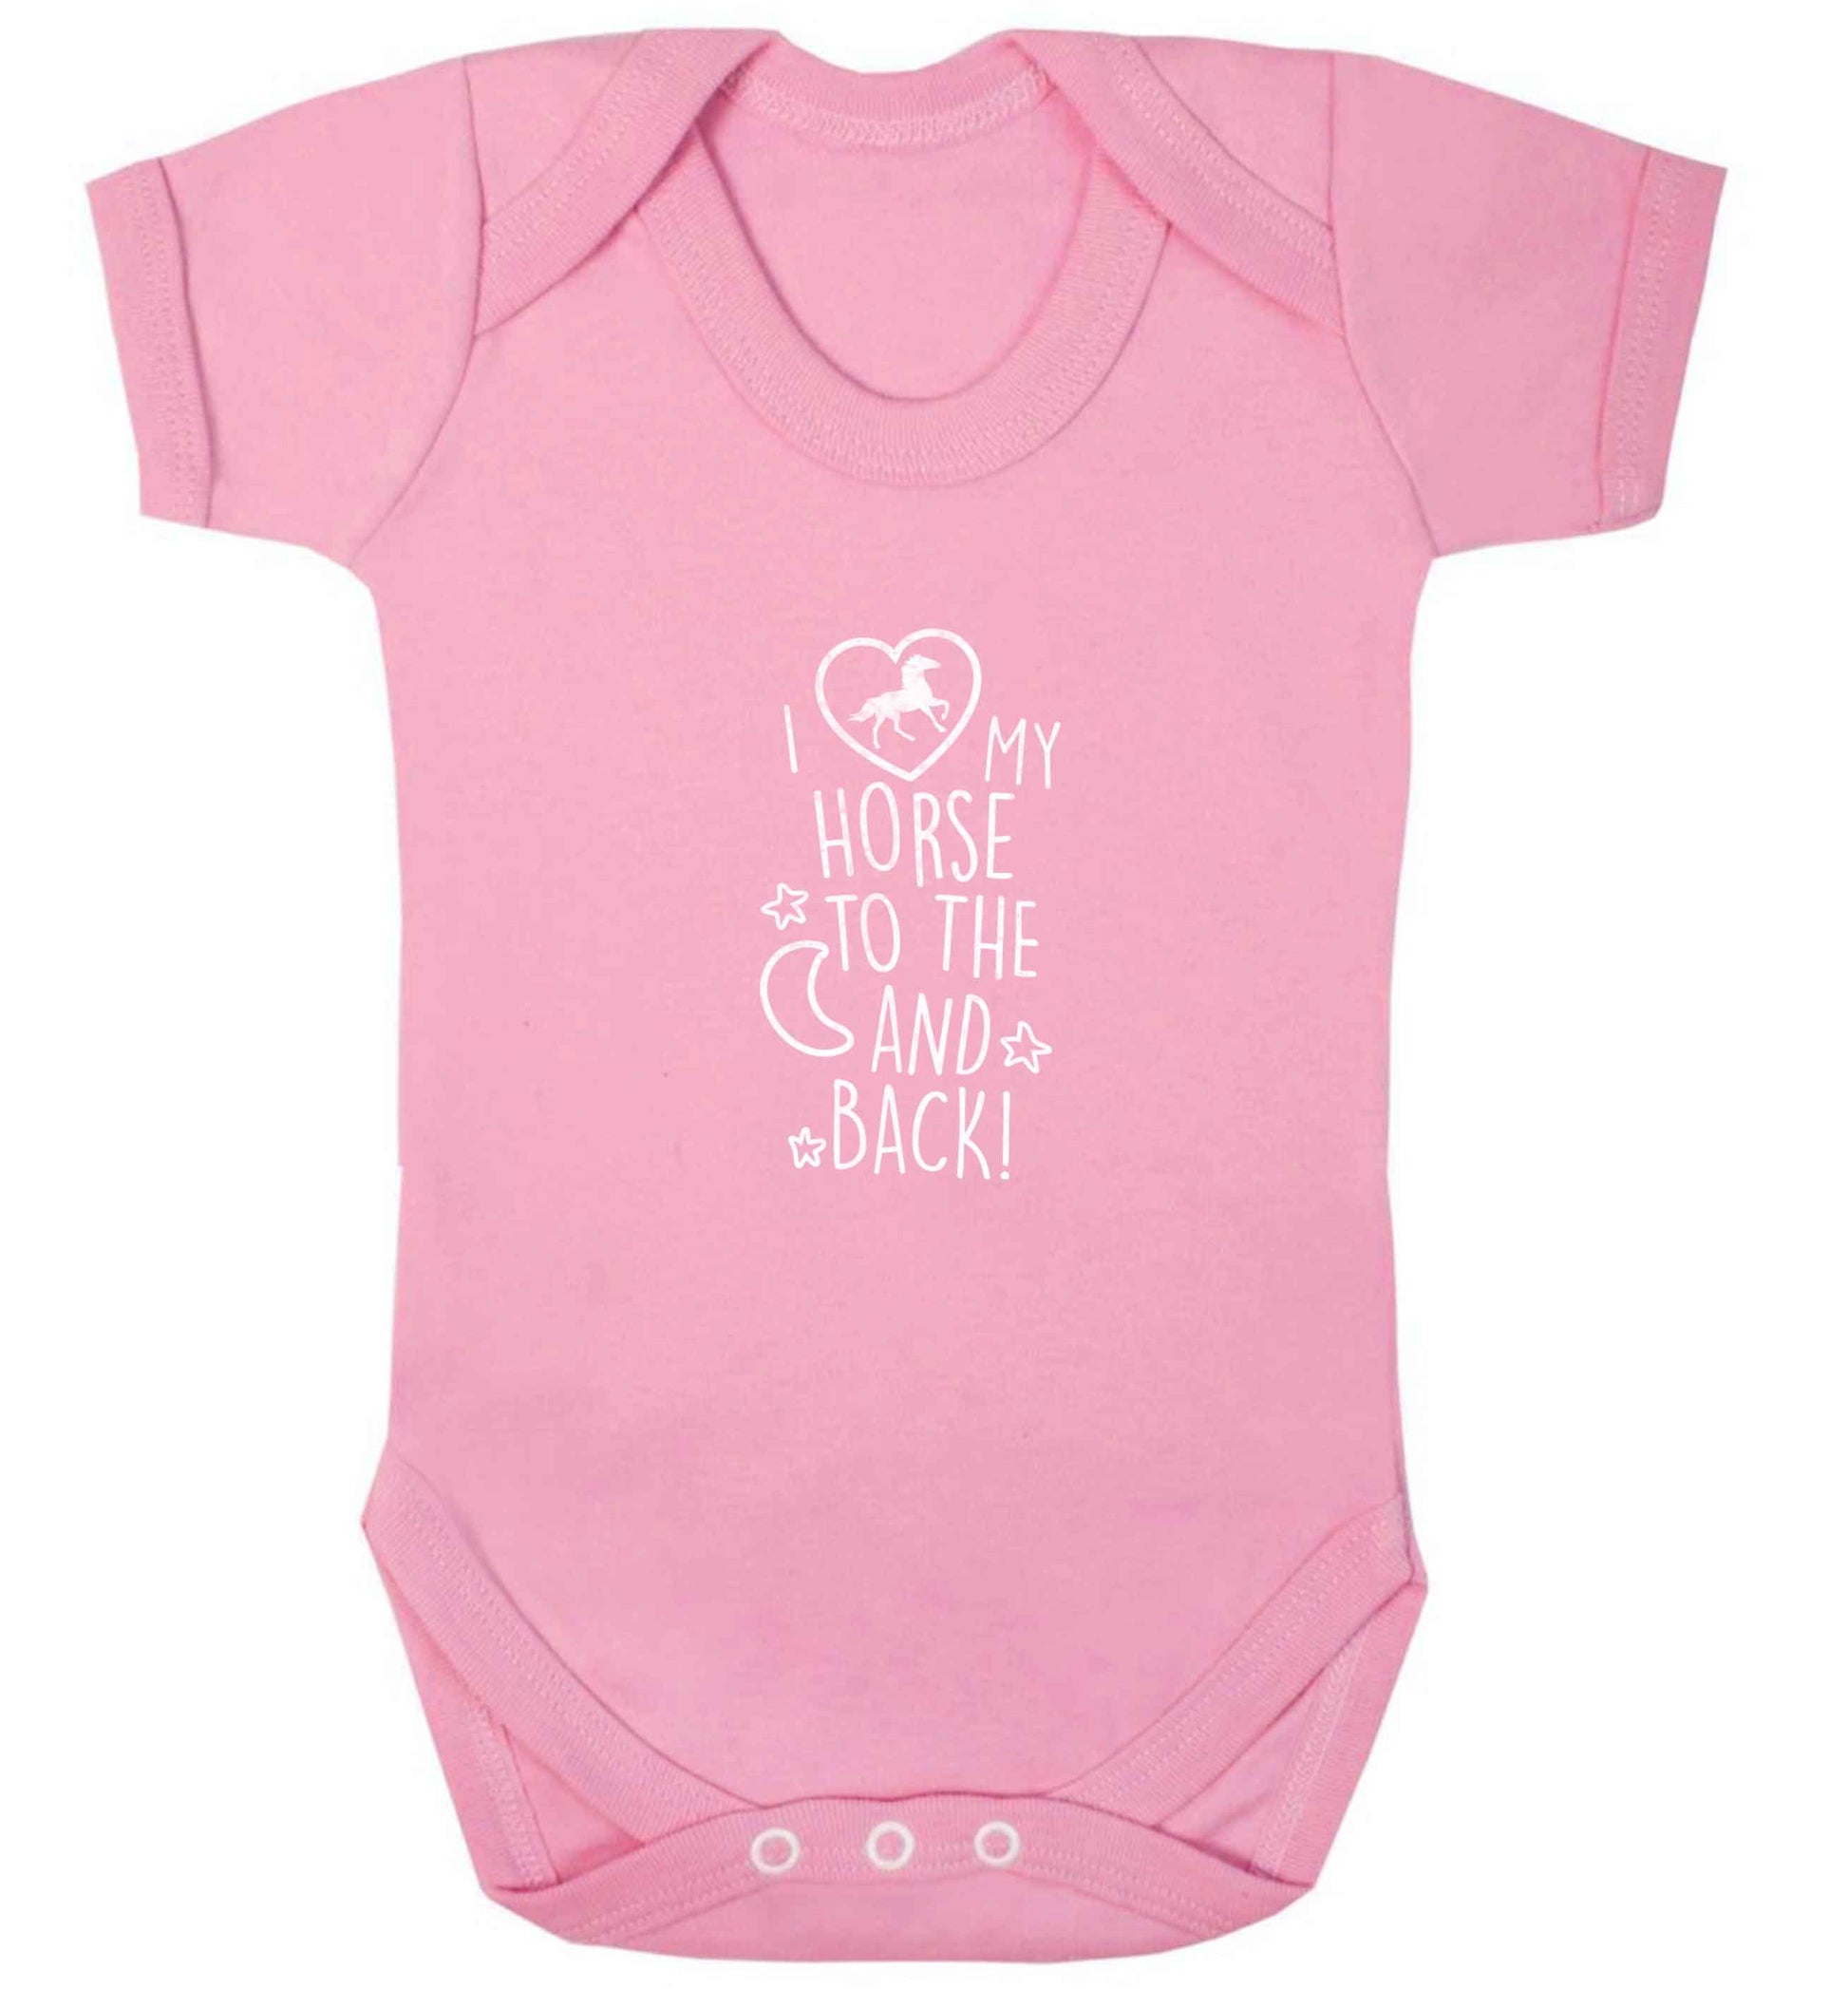 I love my horse to the moon and back baby vest pale pink 18-24 months